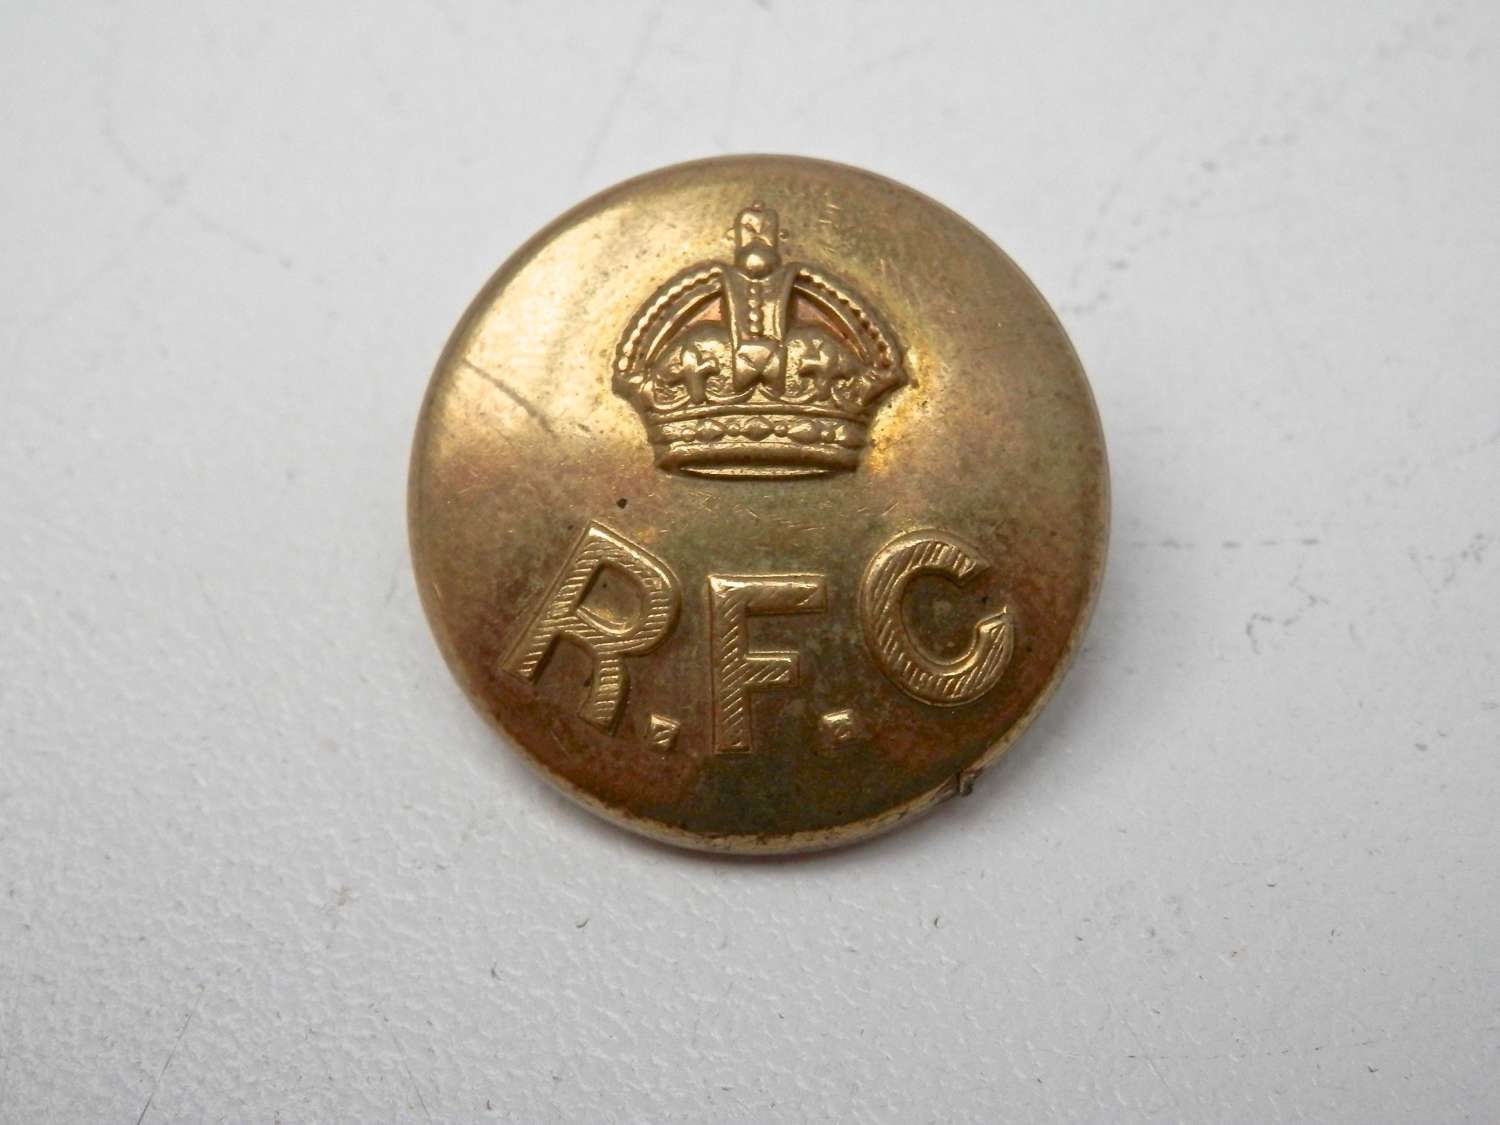 Royal flying corps button dated 1917